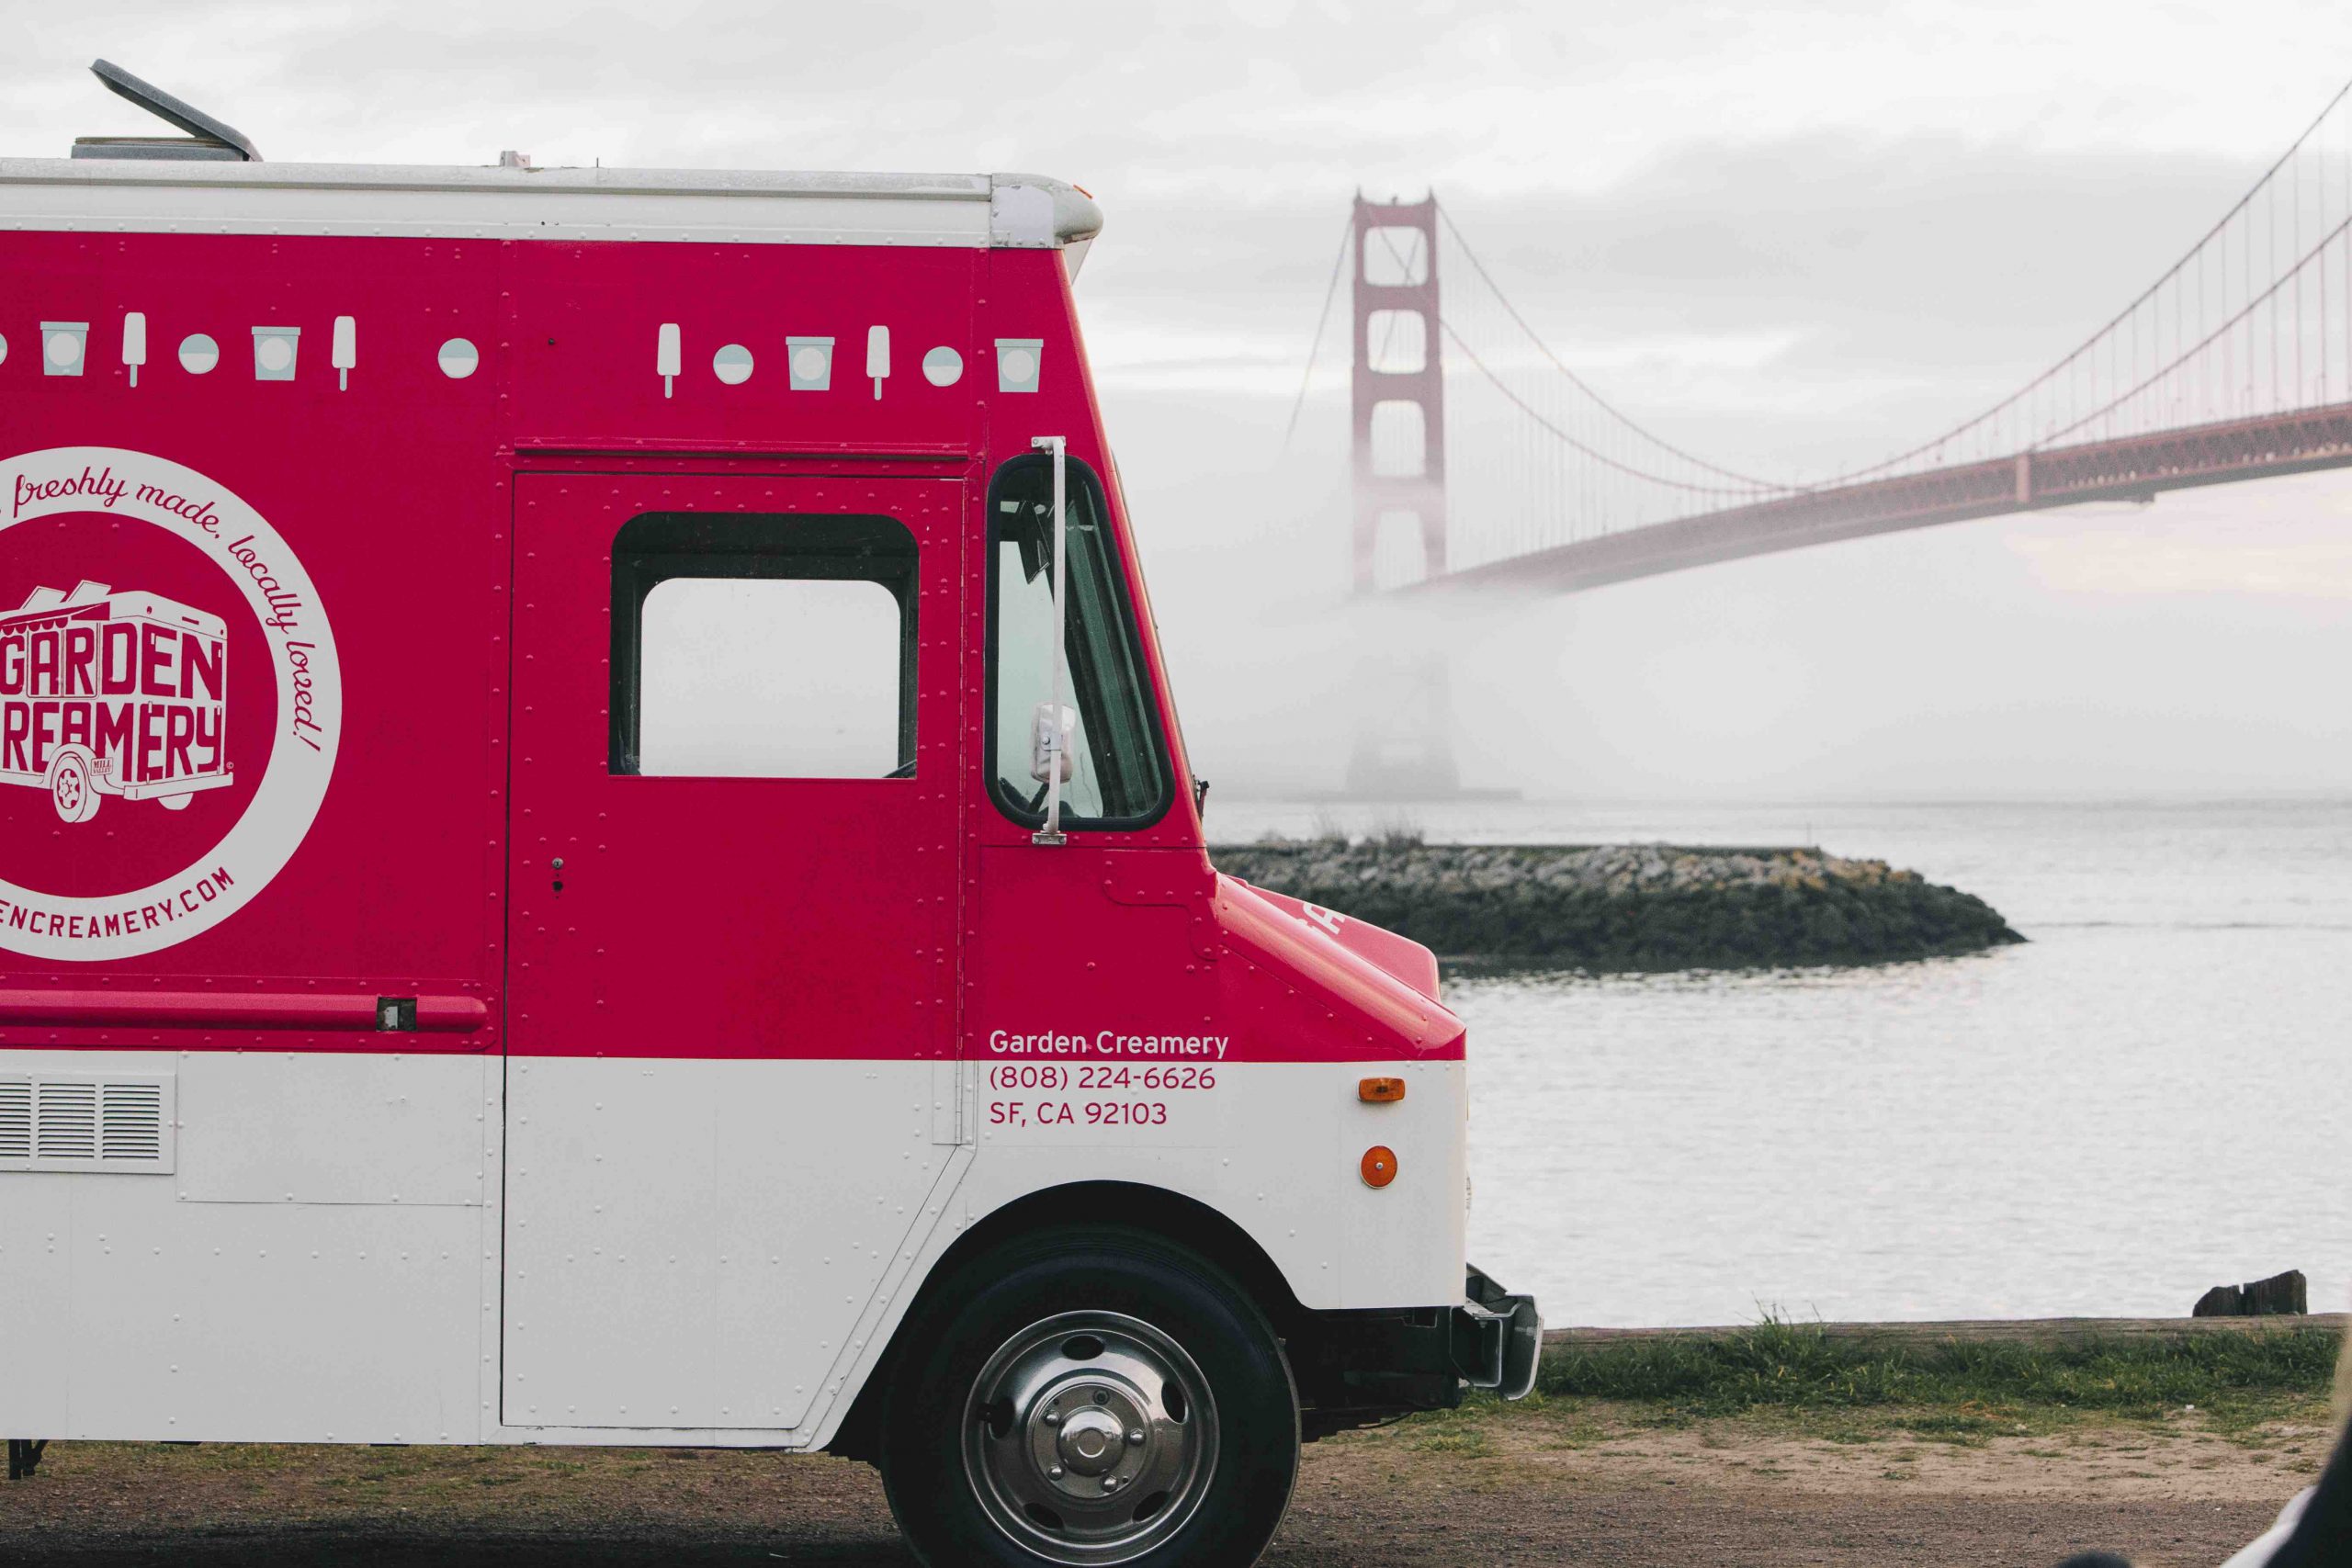 A red and white food truck in front of the San Francisco Bay Bridge